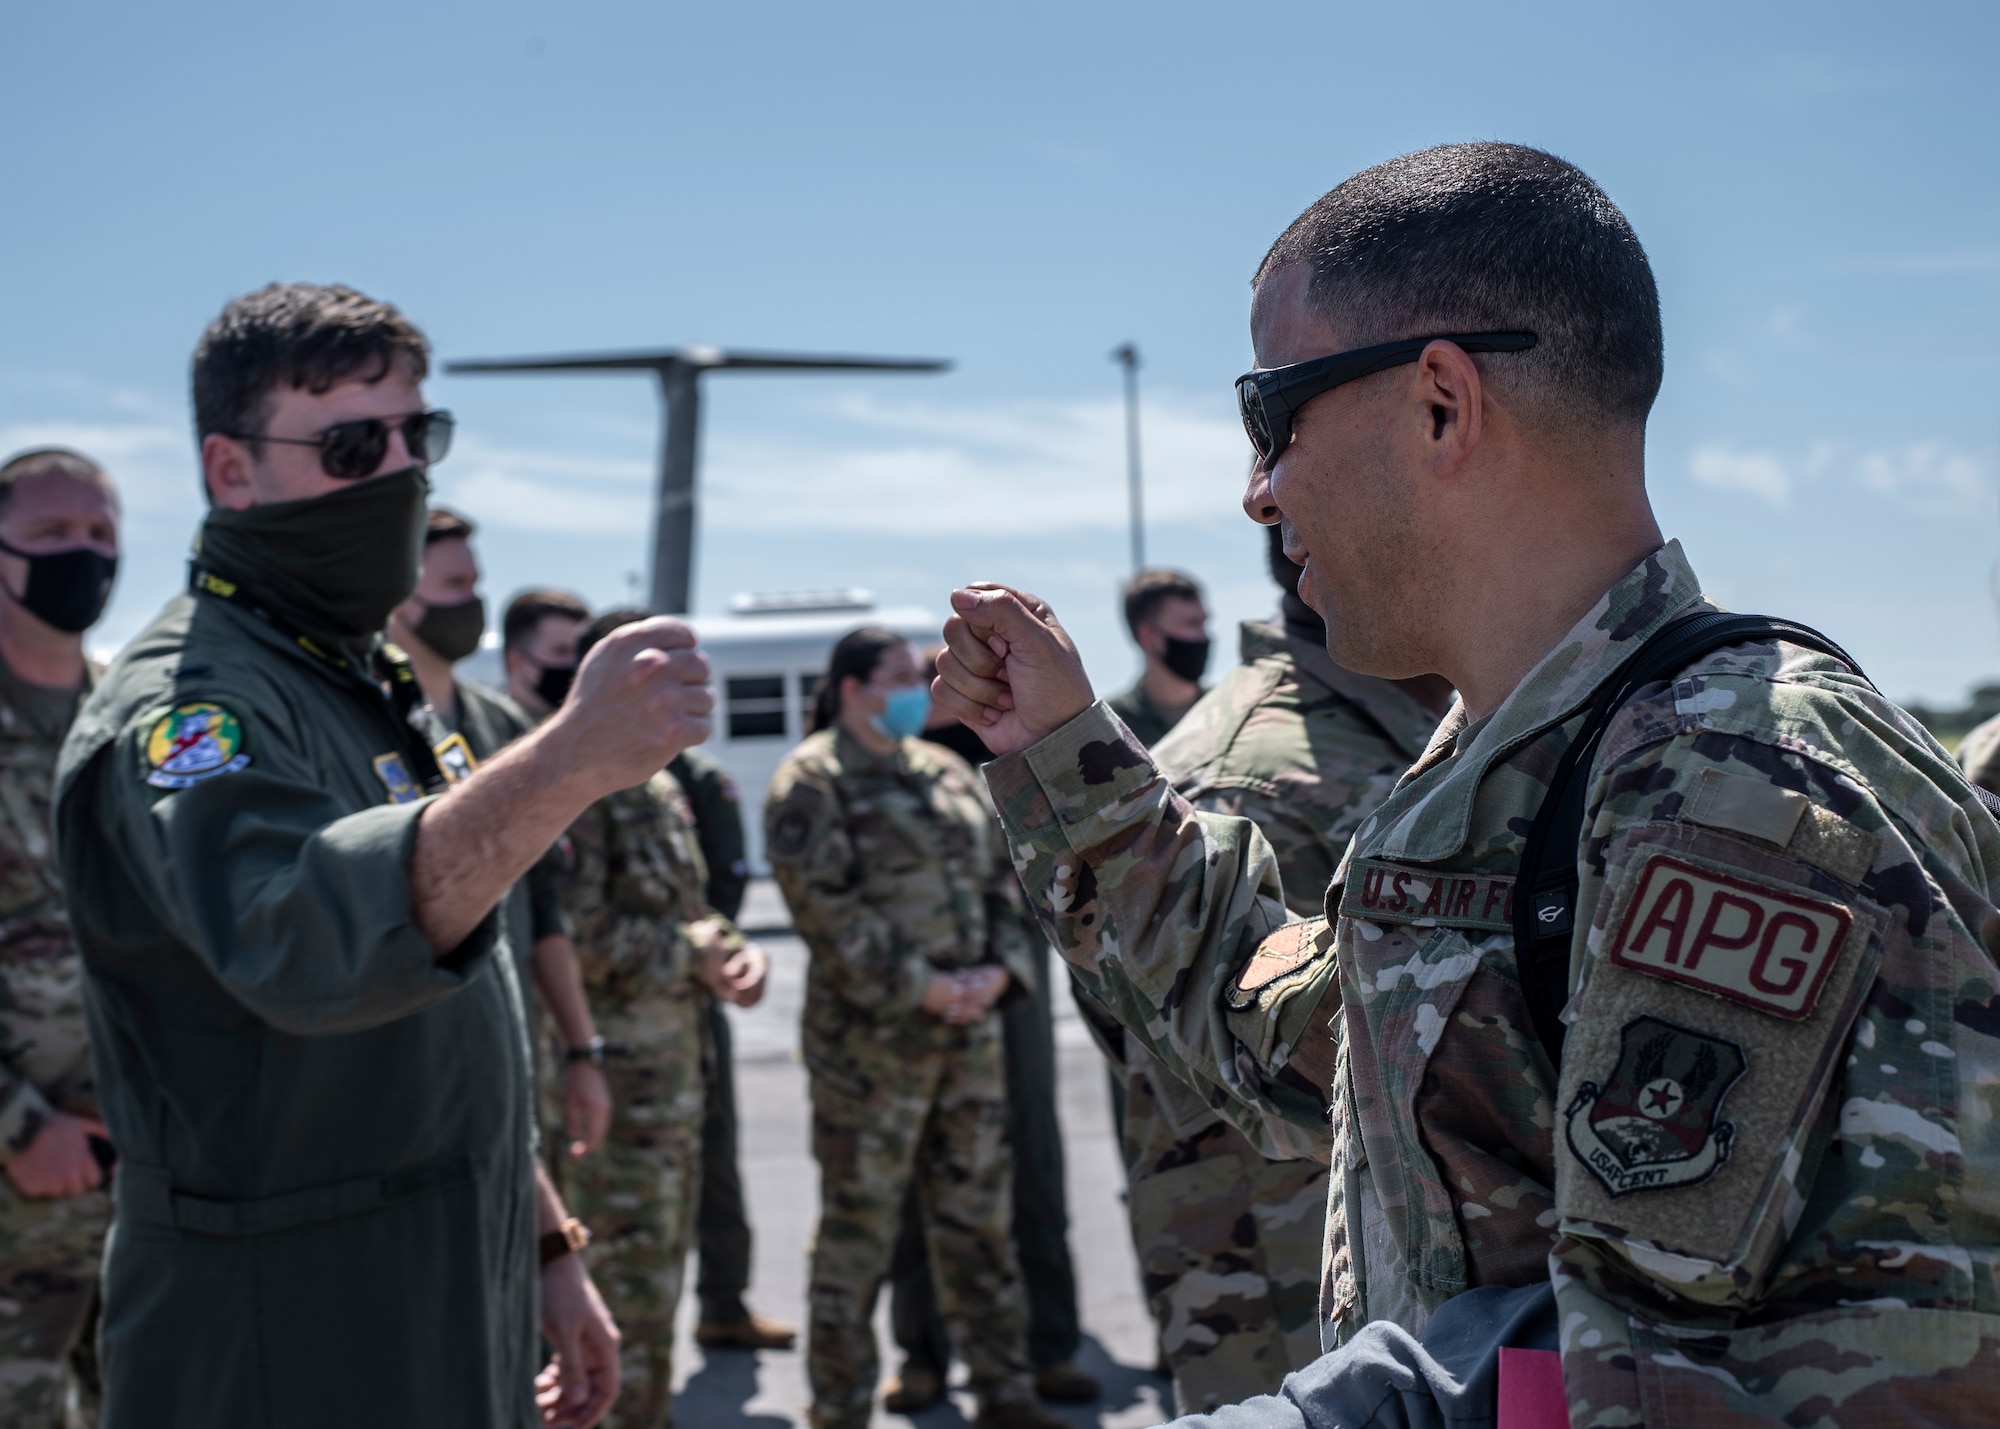 An Airman fist-bumps a wingman after returning home from deployment at MacDill Air Force Base, Florida, Sept. 27. 2021.